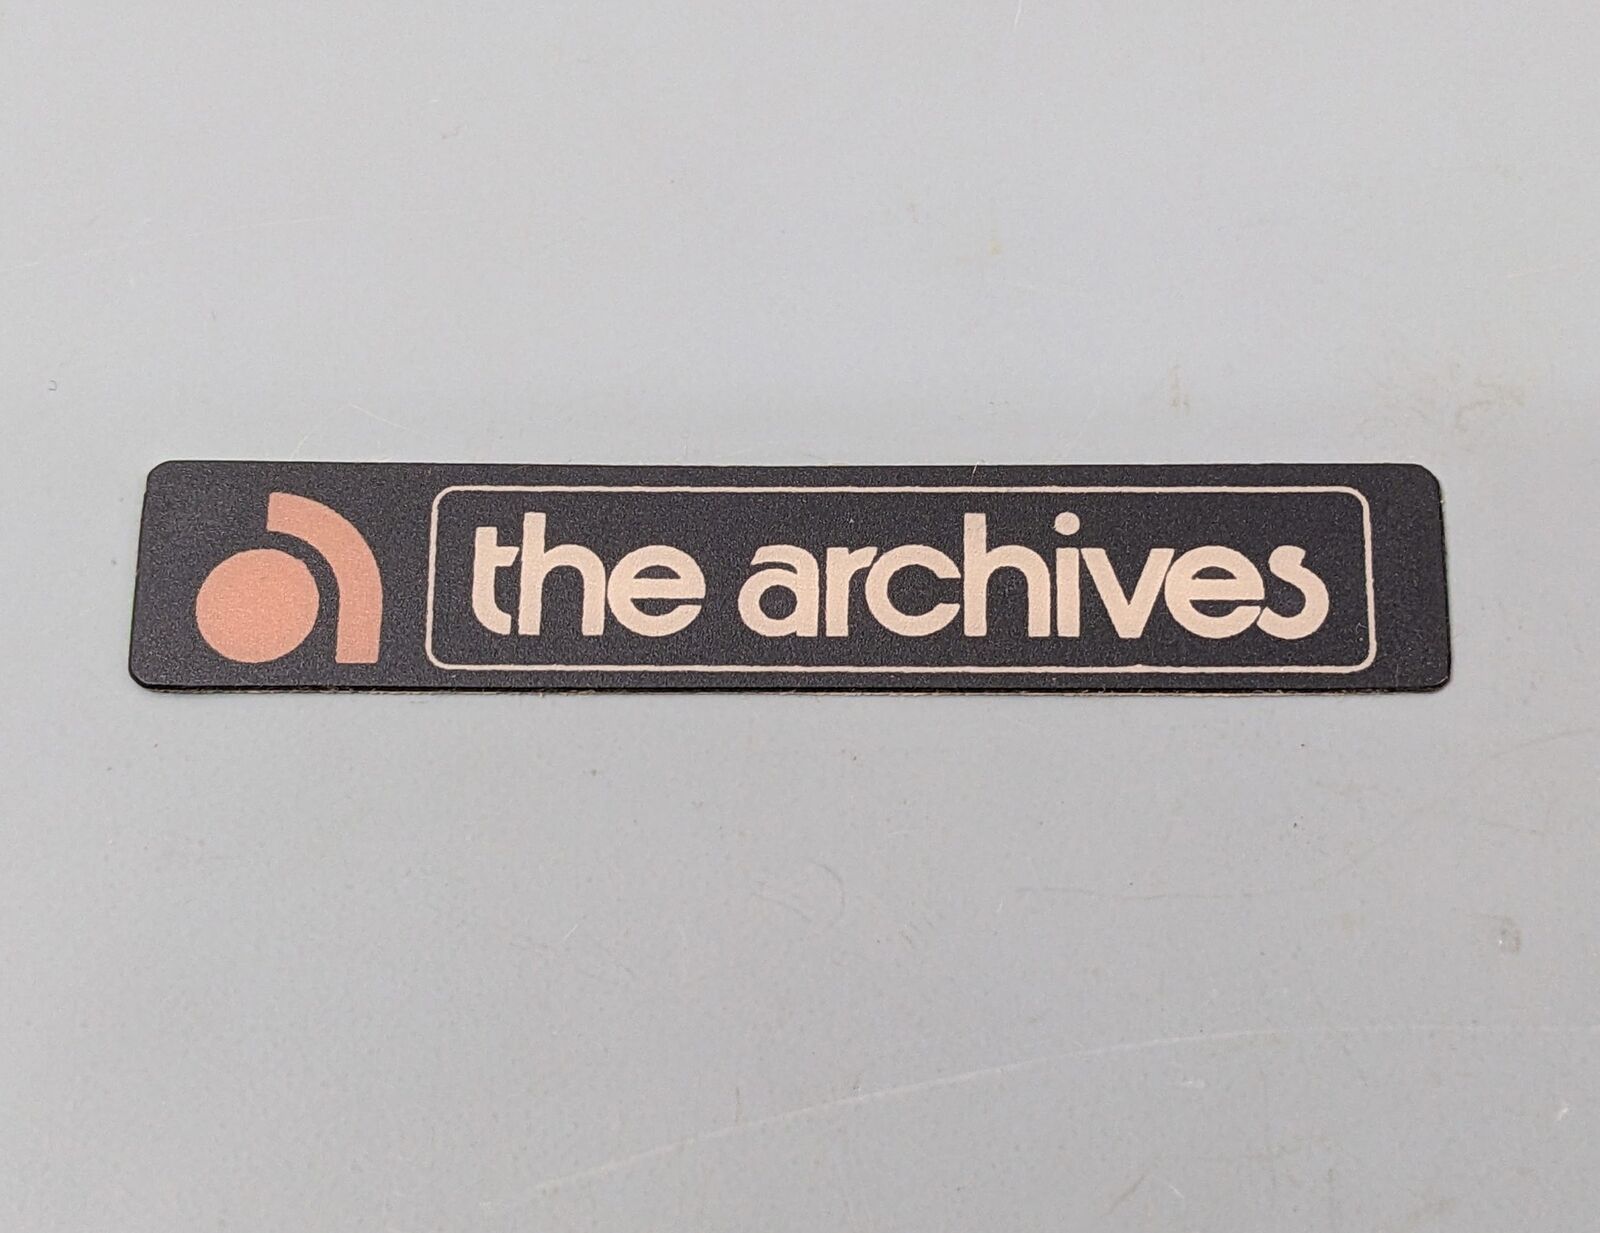 THE ARCHIVES - Vintage Computer Label, Rare Tag, Sticker, New Old Stock